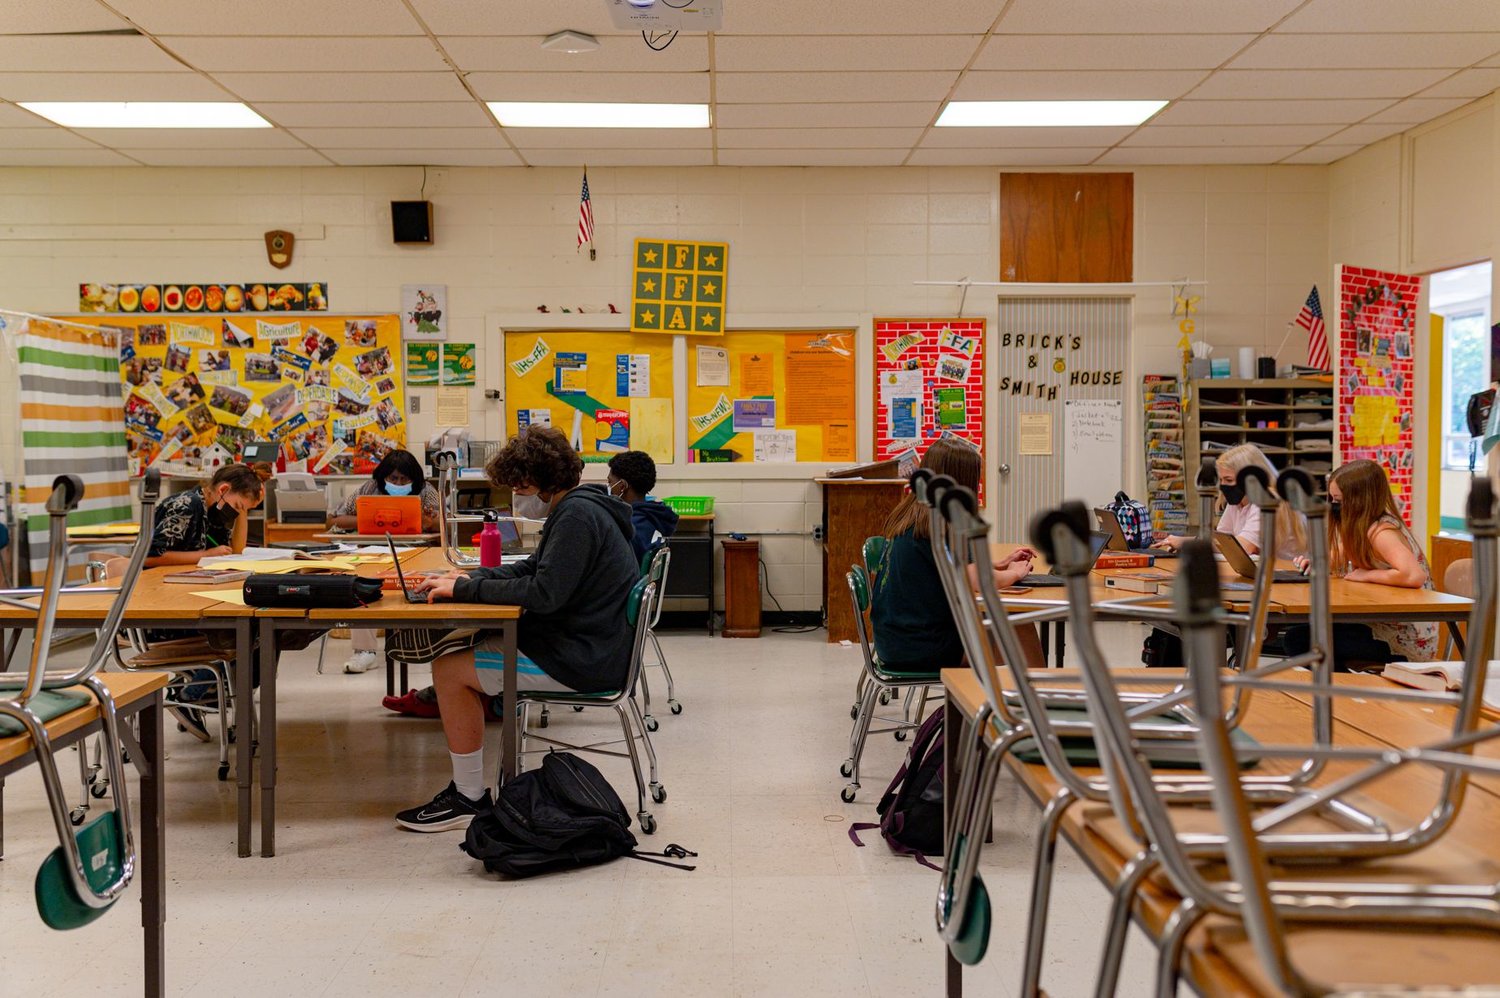 Over the course of the pandemic, CCS has received a total allotment of about $18.8 million as part of North Carolina’s Elementary & Secondary School (K-12) Emergency Relief Fund (ESSER), to be received and spent over the next few years.